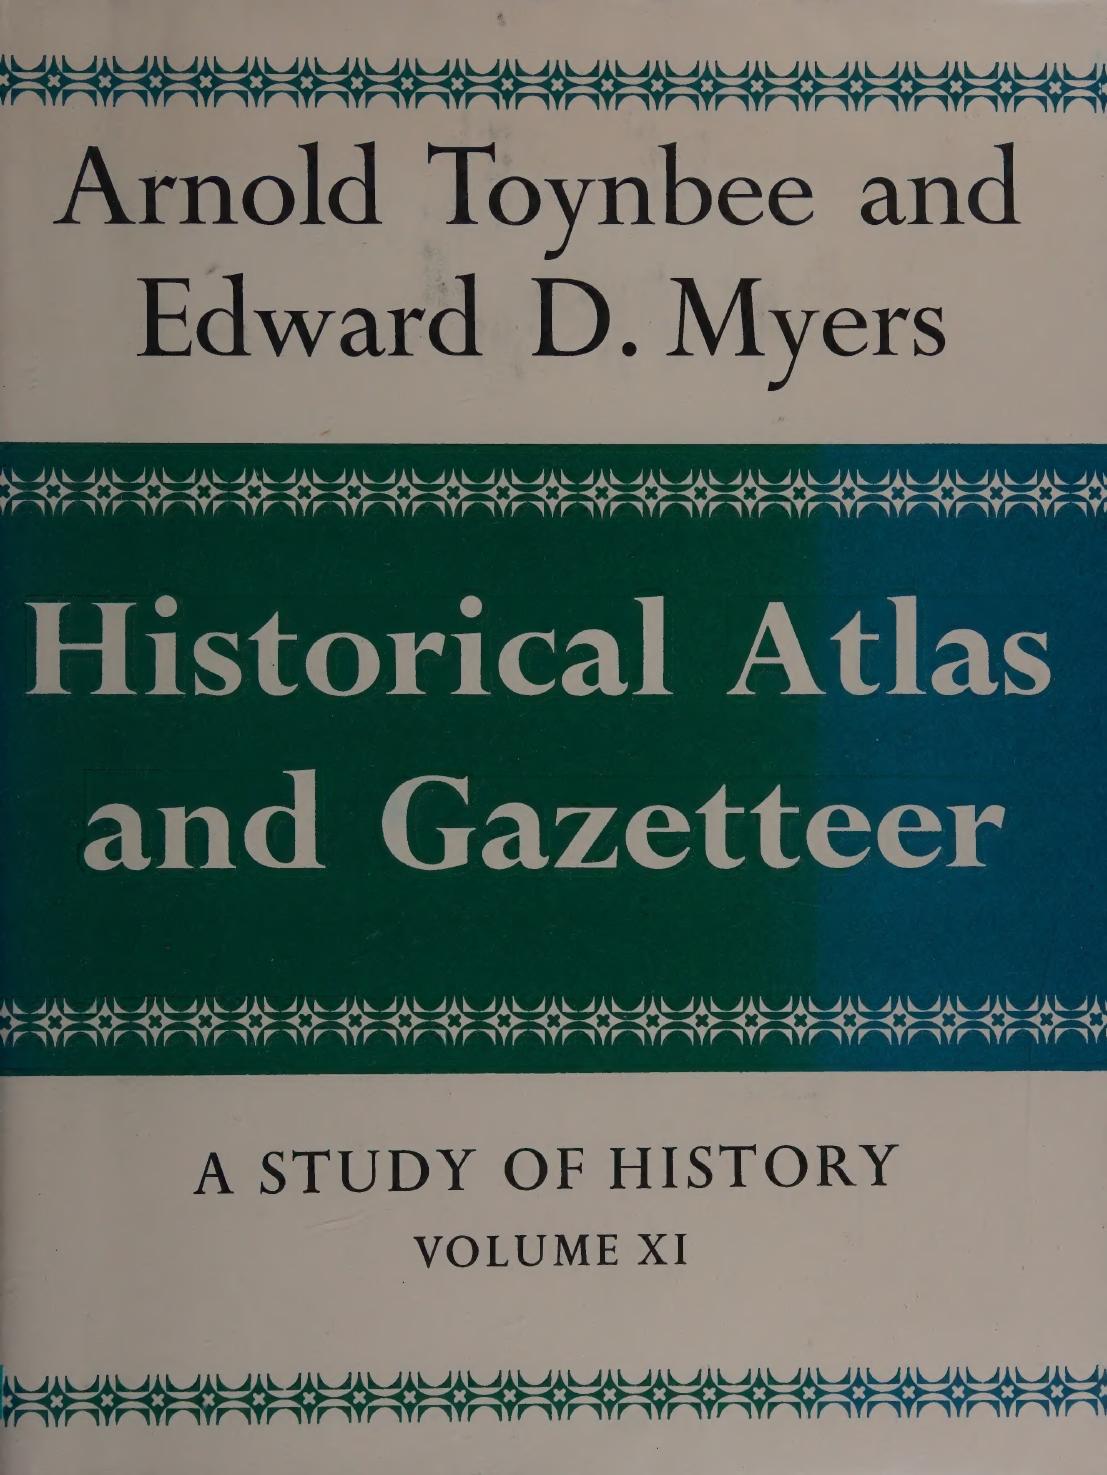 A Study of History - Volume 11 - Historical Atlas and Gazetteer